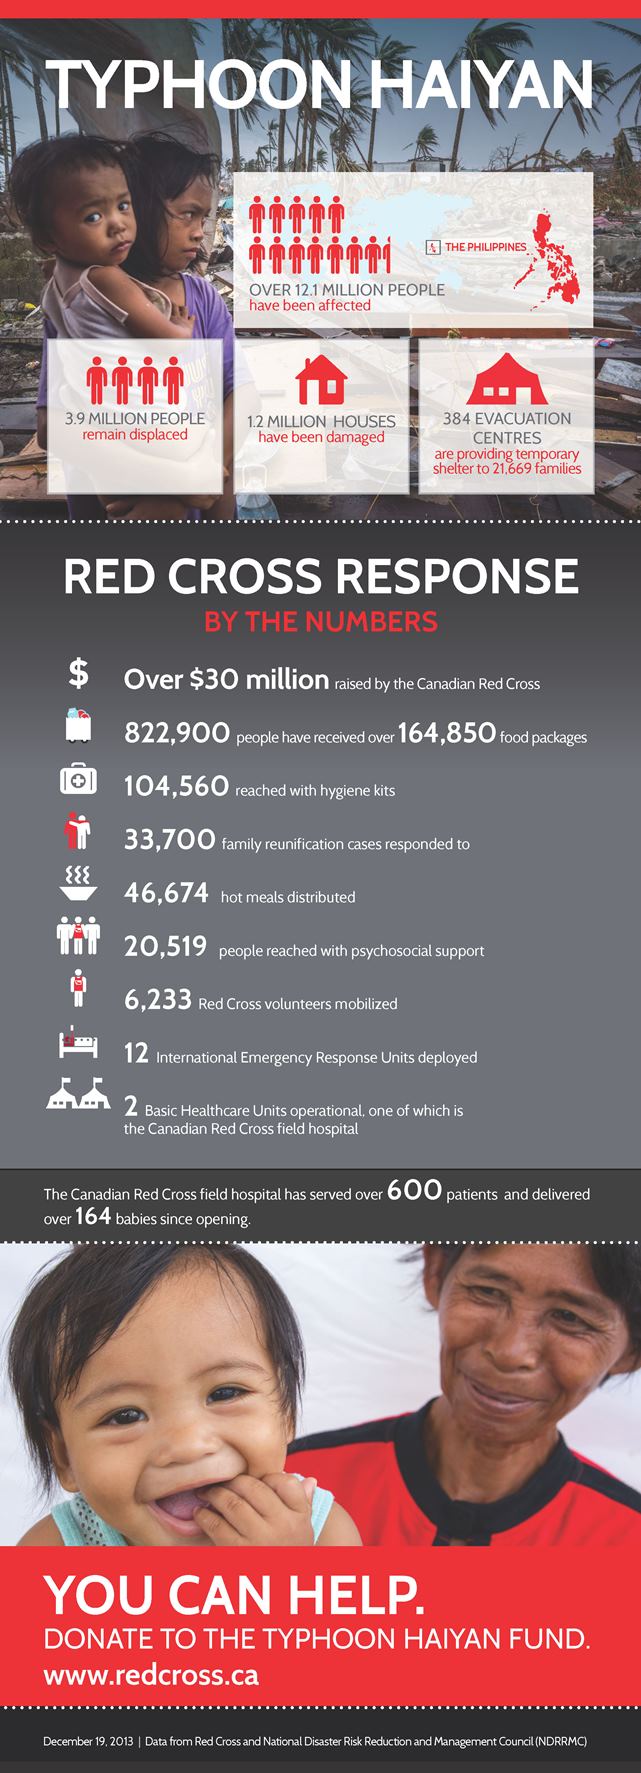 Infographic on Red Cross response to Typhoon Haiyan